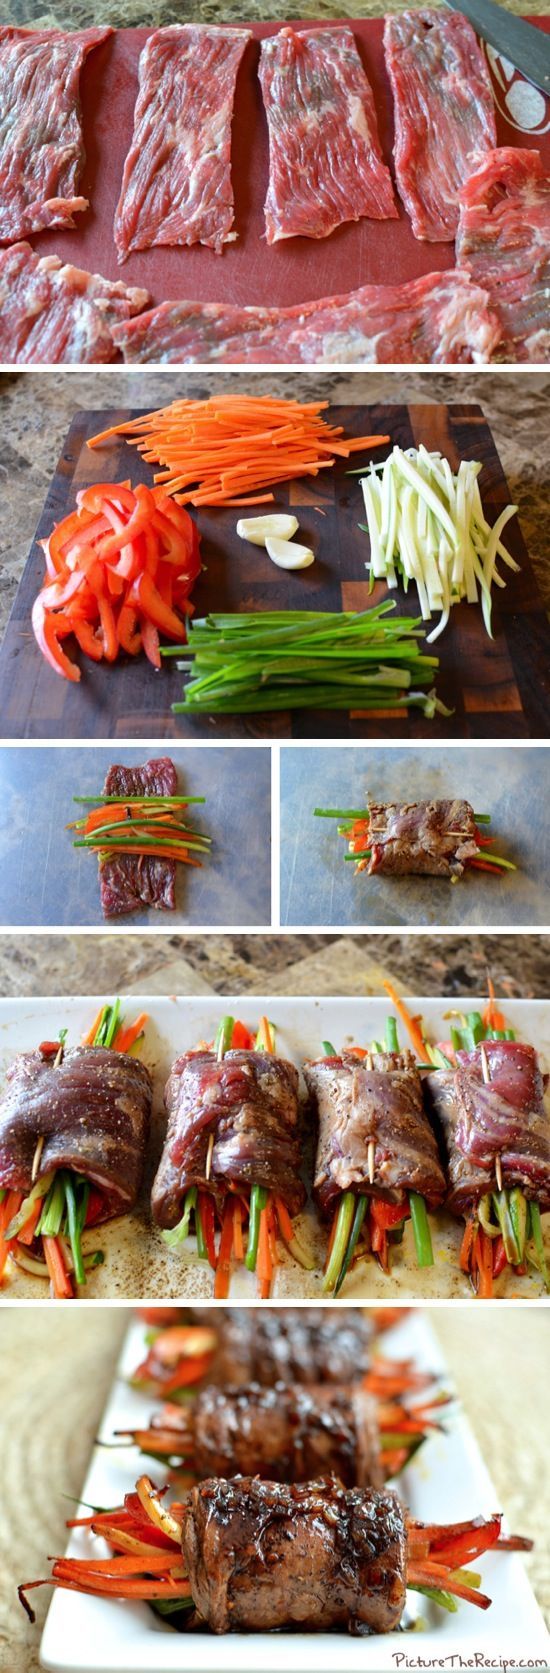 Balsamic Glazed Steak Rolls by picturetherecipe via recipebyphoto: Perfect with